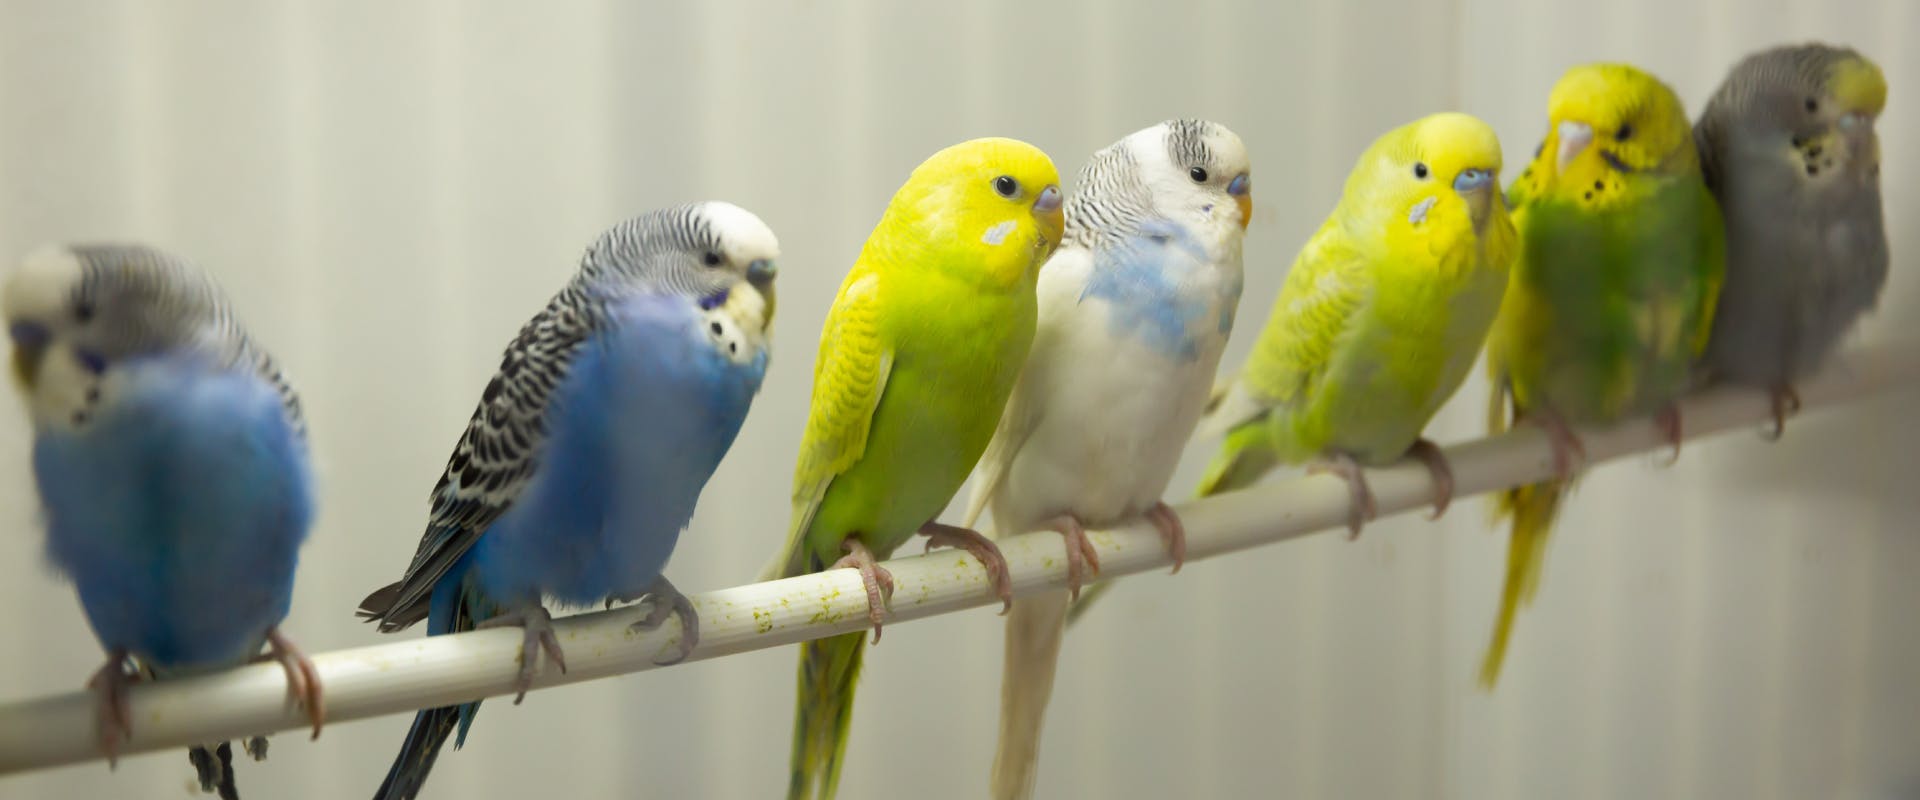 a flock of different colored budgerigars resting on a perch in a bird cage